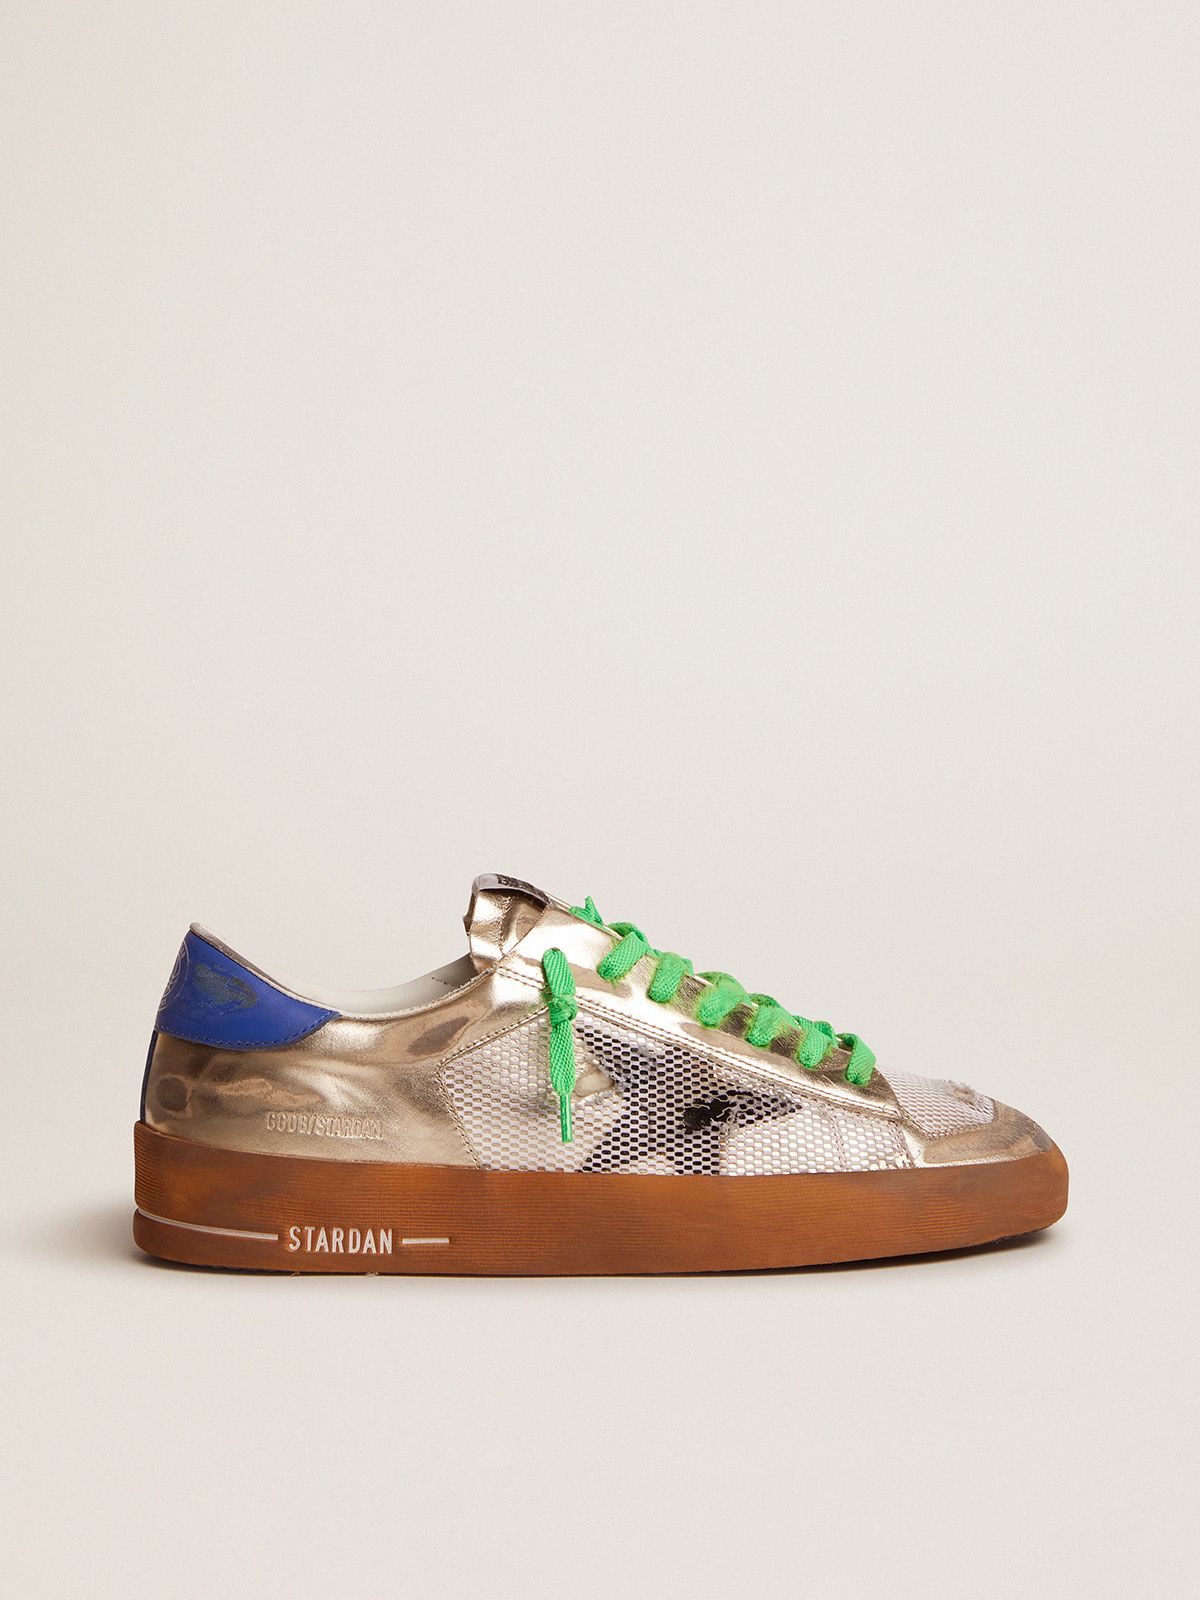 golden goose with blue leather tab heel sneakers in an mesh LAB laminated and Stardan electric